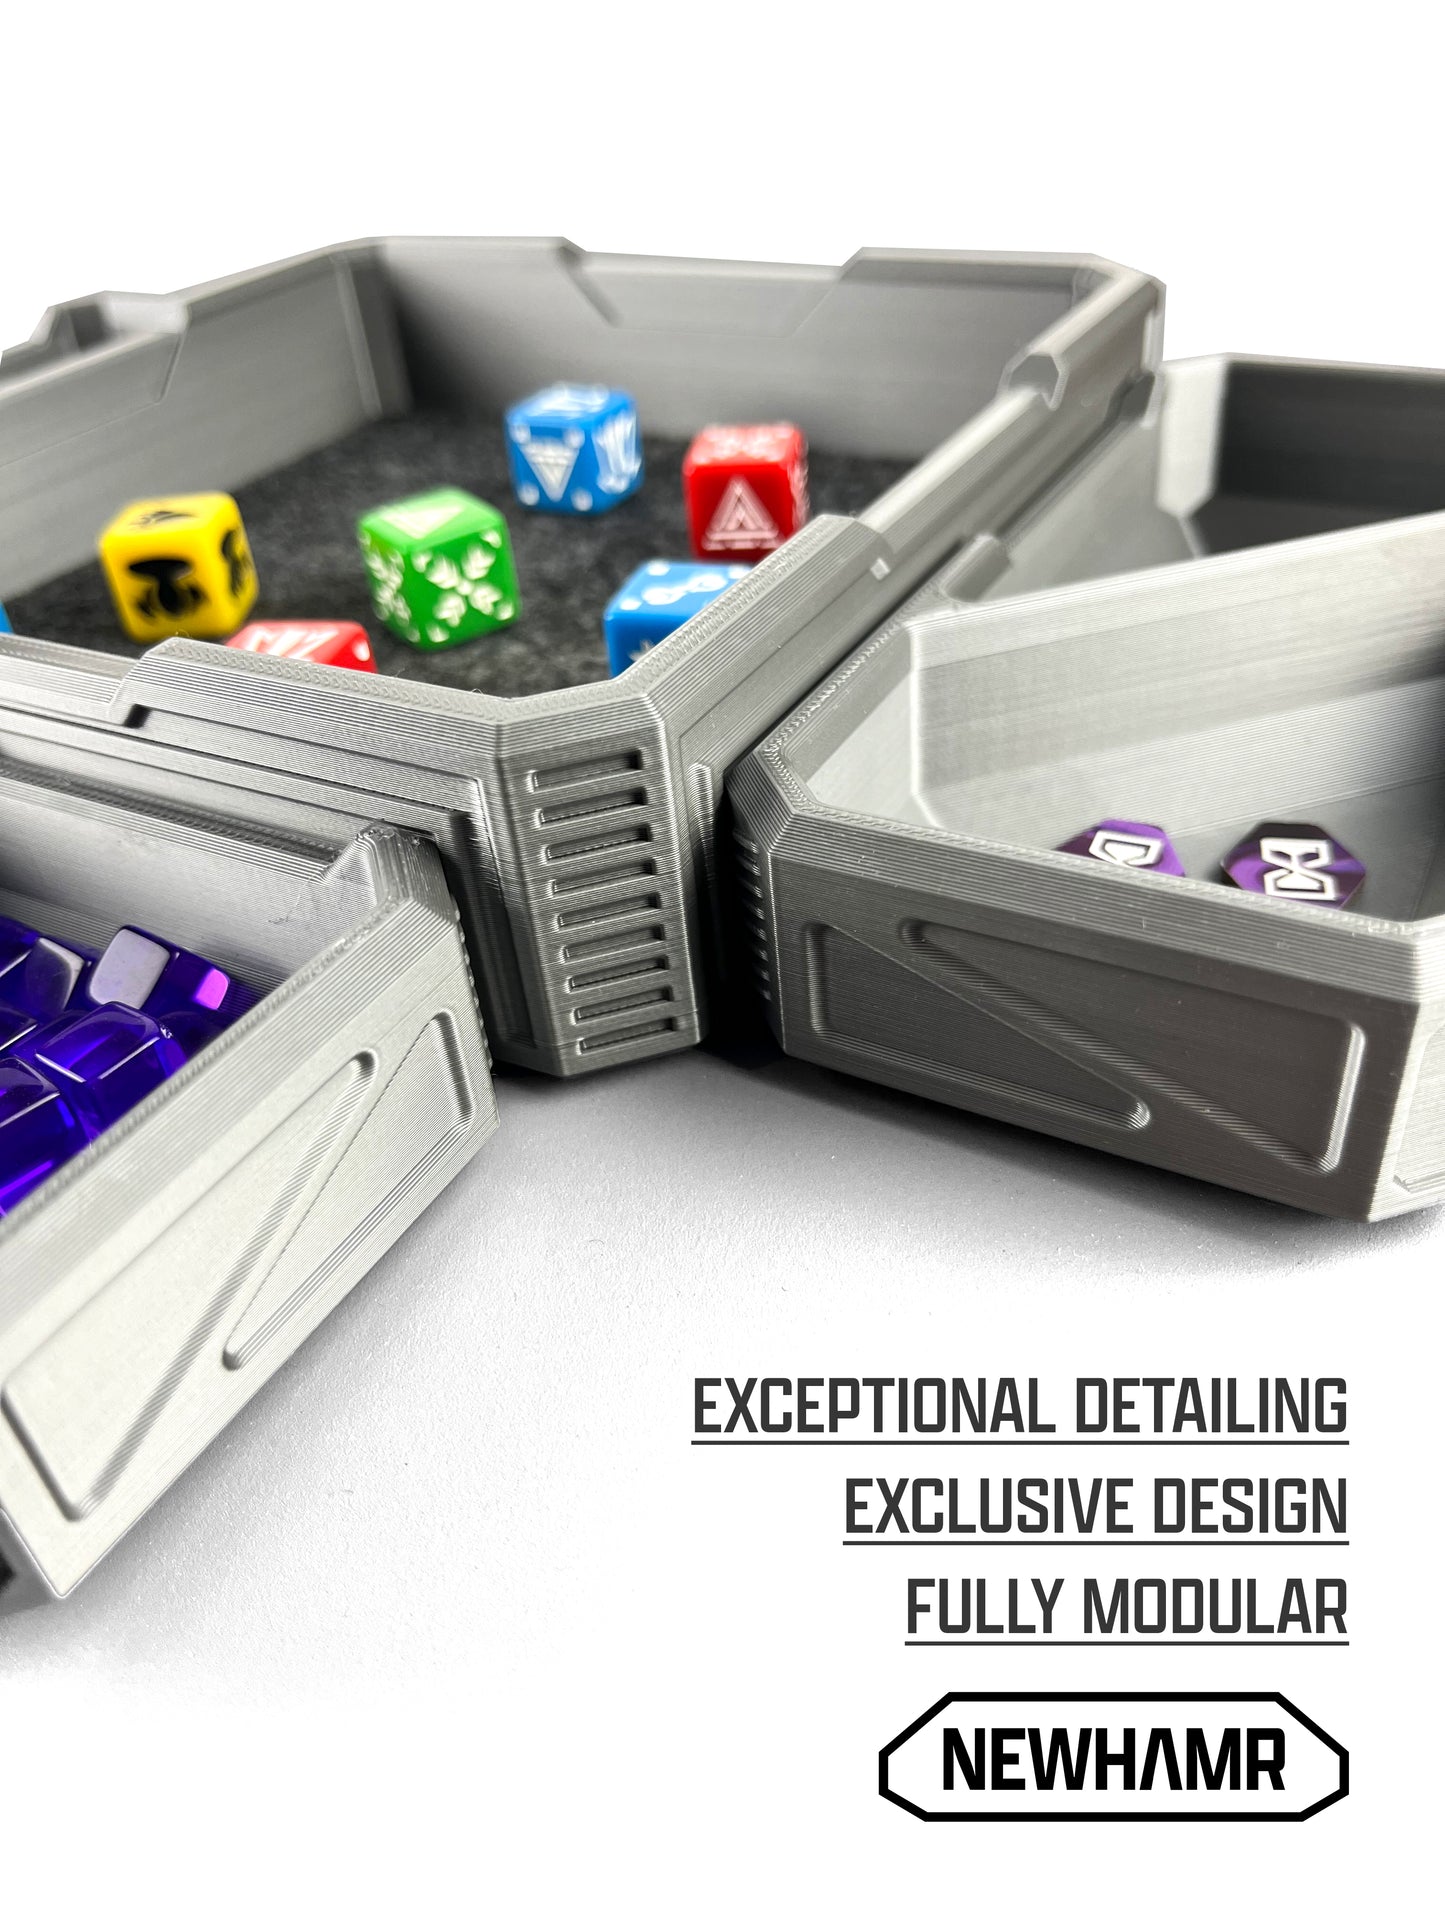 Titan Modular Dice Tray System for Tabletop Gaming